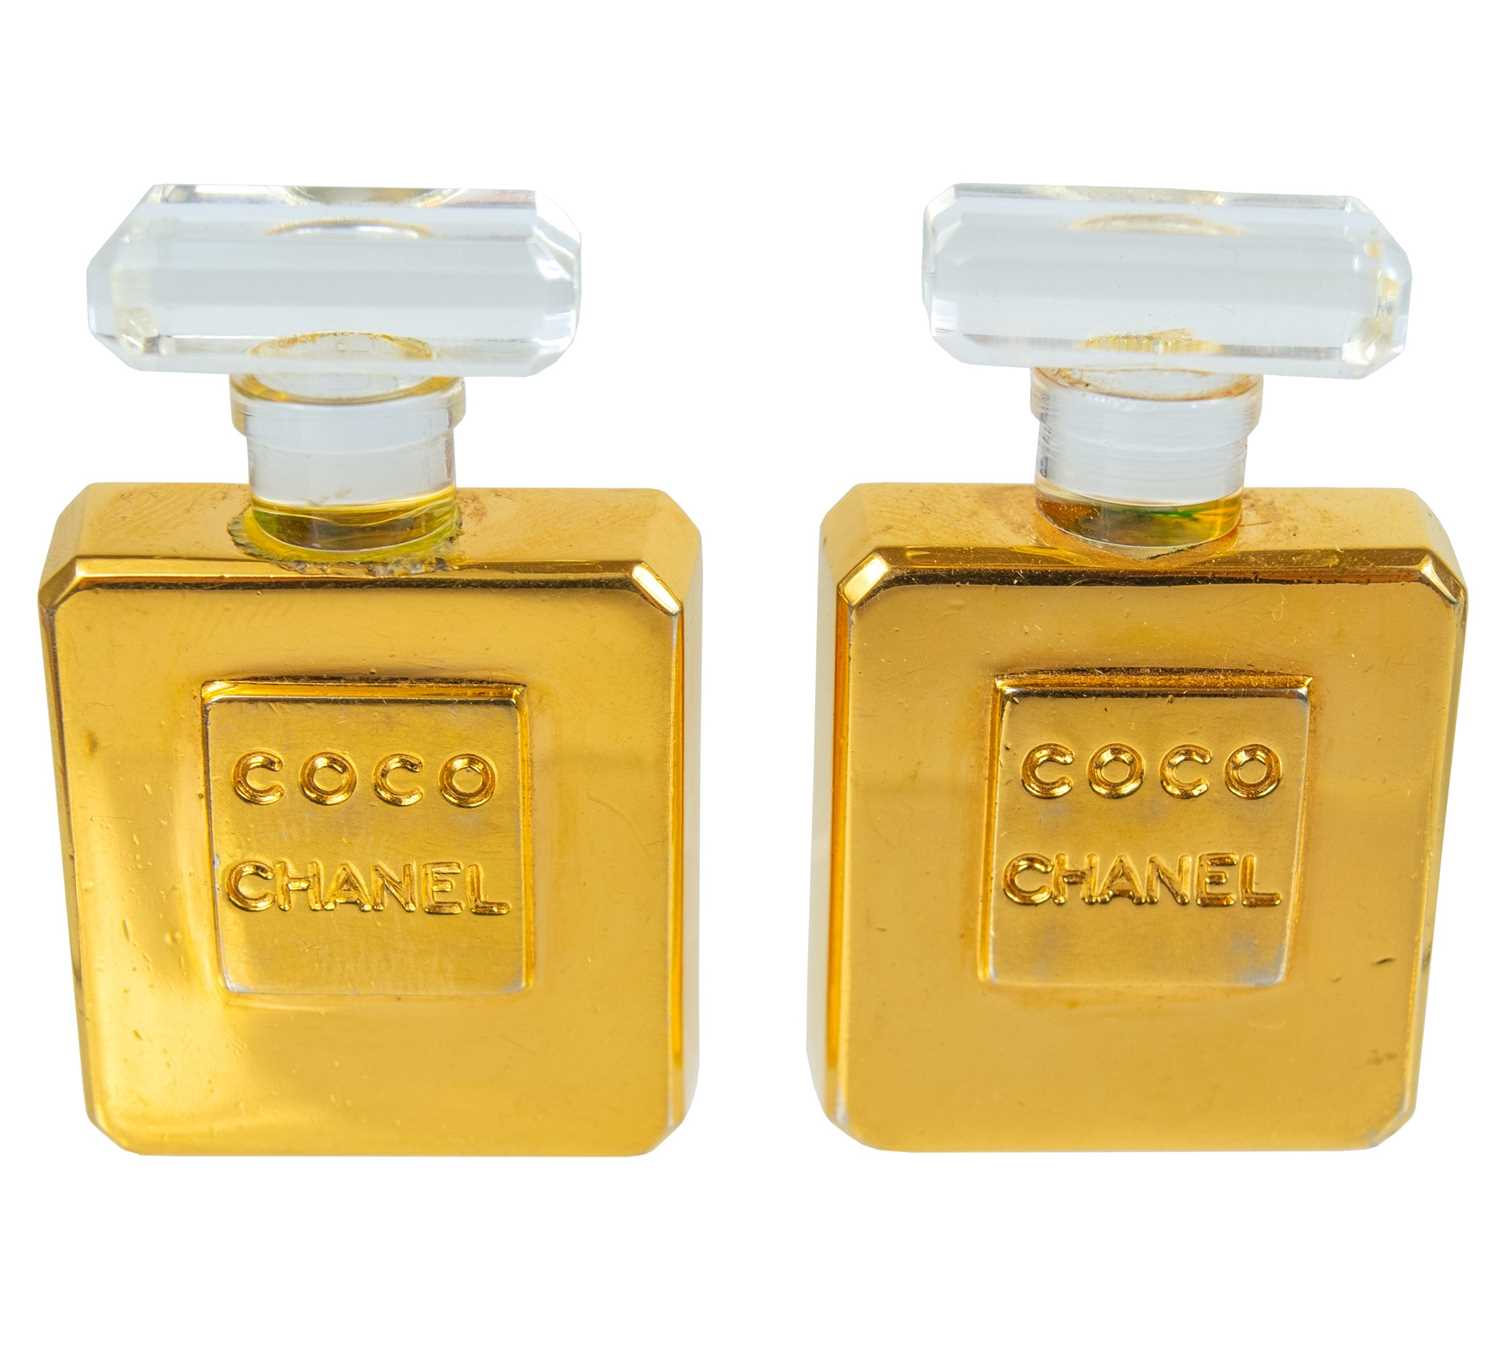 Lot 573 - A rare pair of Chanel 1980's Coco Chanel perfume bottle earrings.